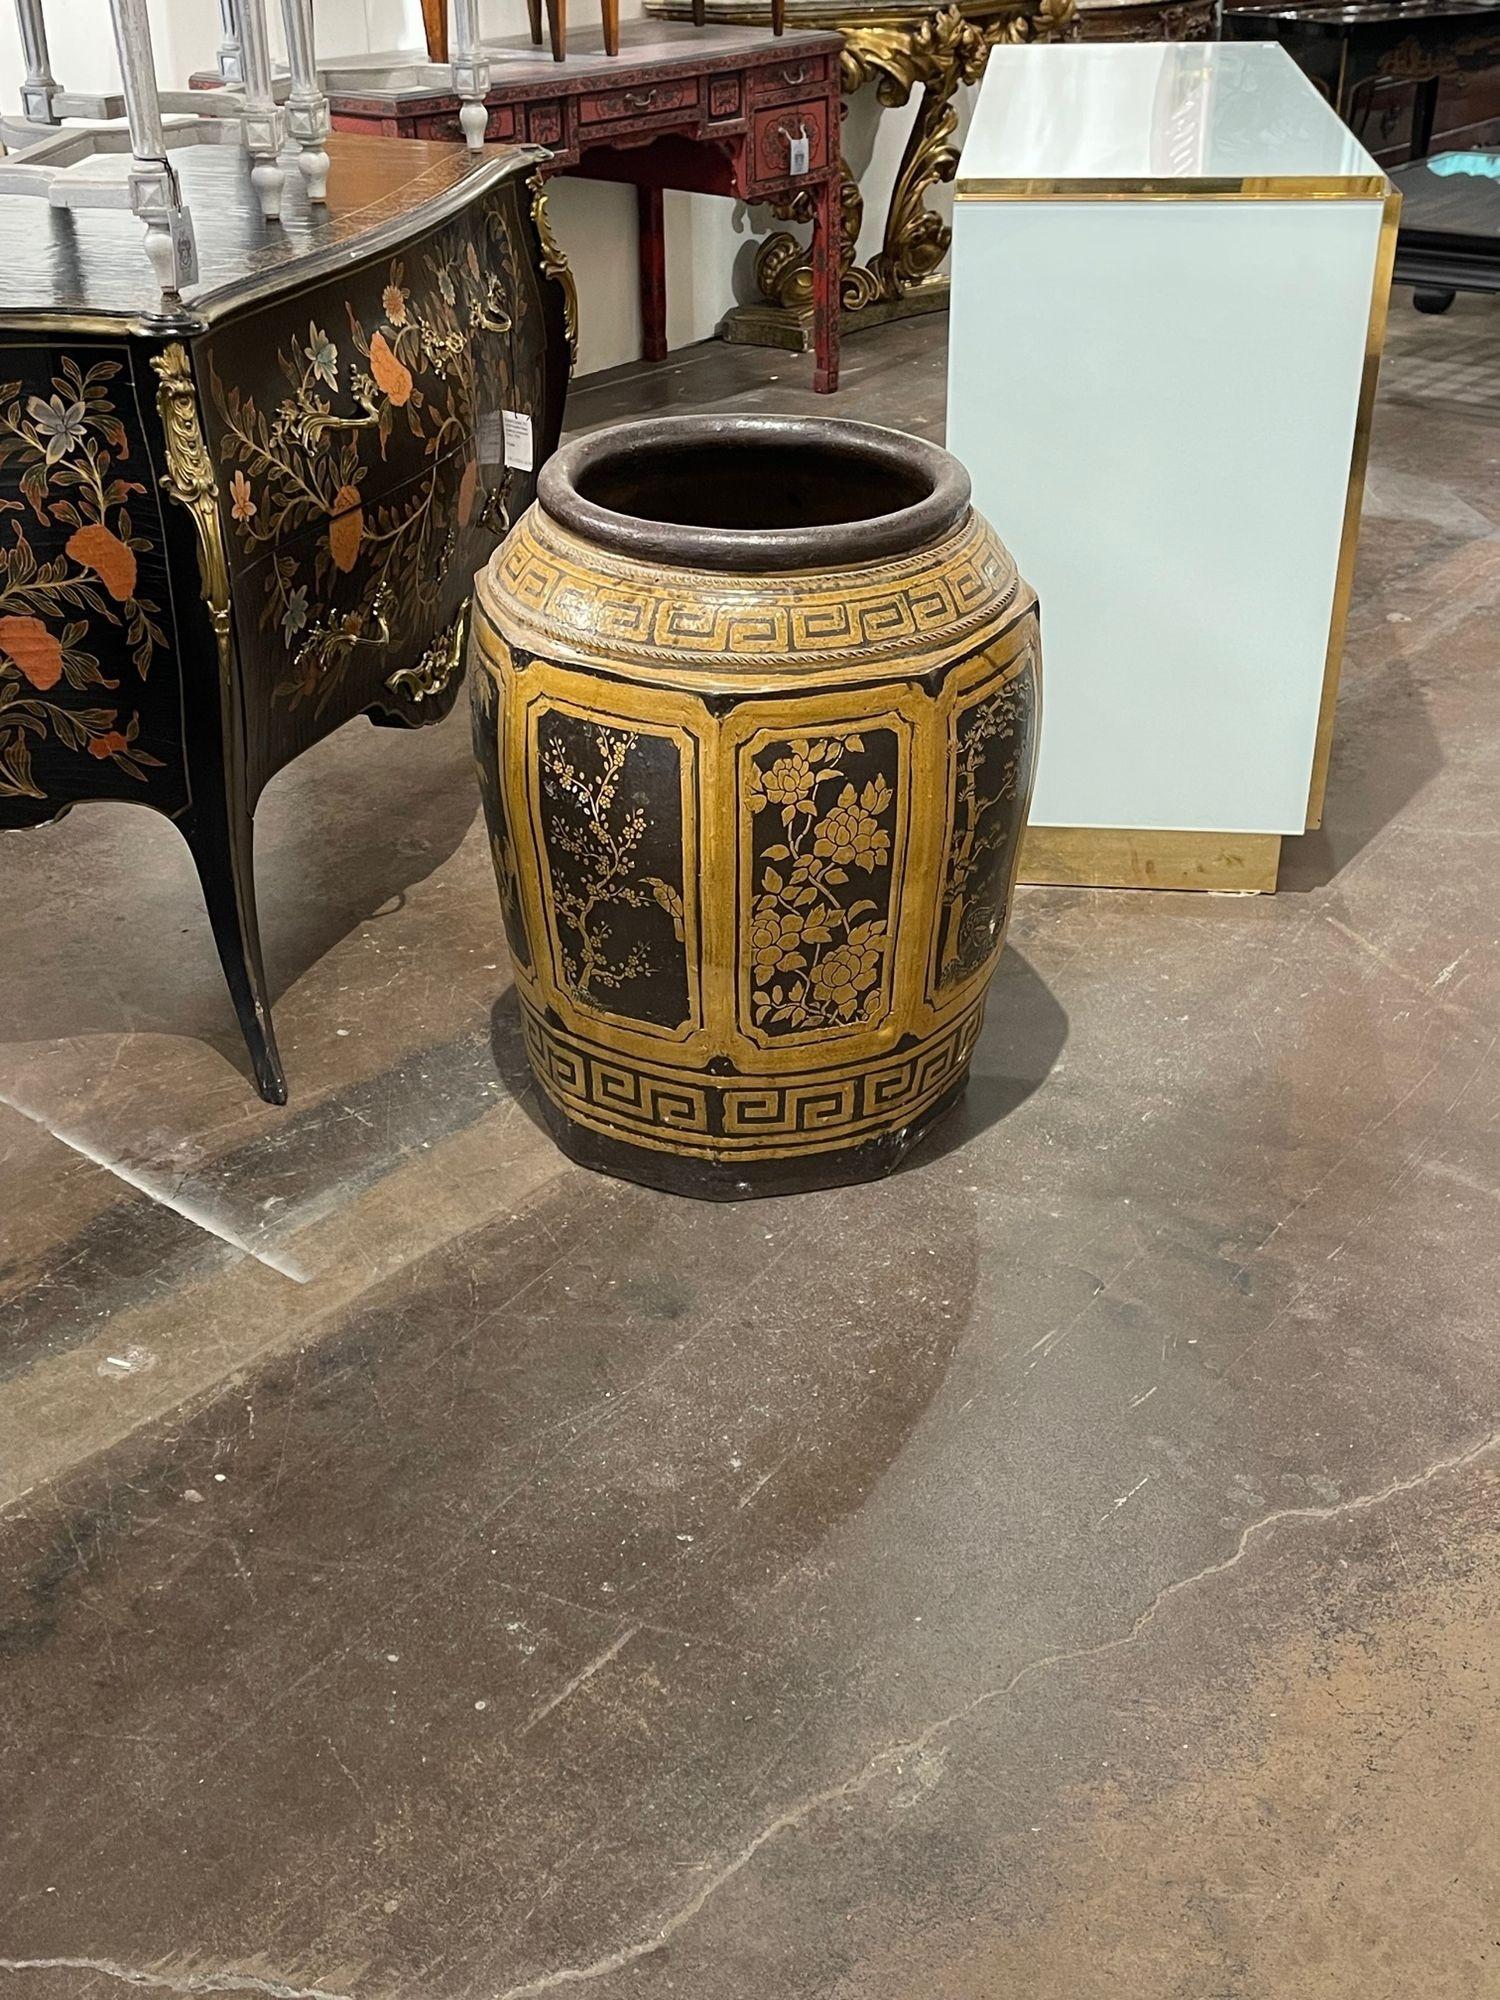 Very nice decorative mid century oriental glazed planter with Greek Key motif. Large scale and such a pretty design!!